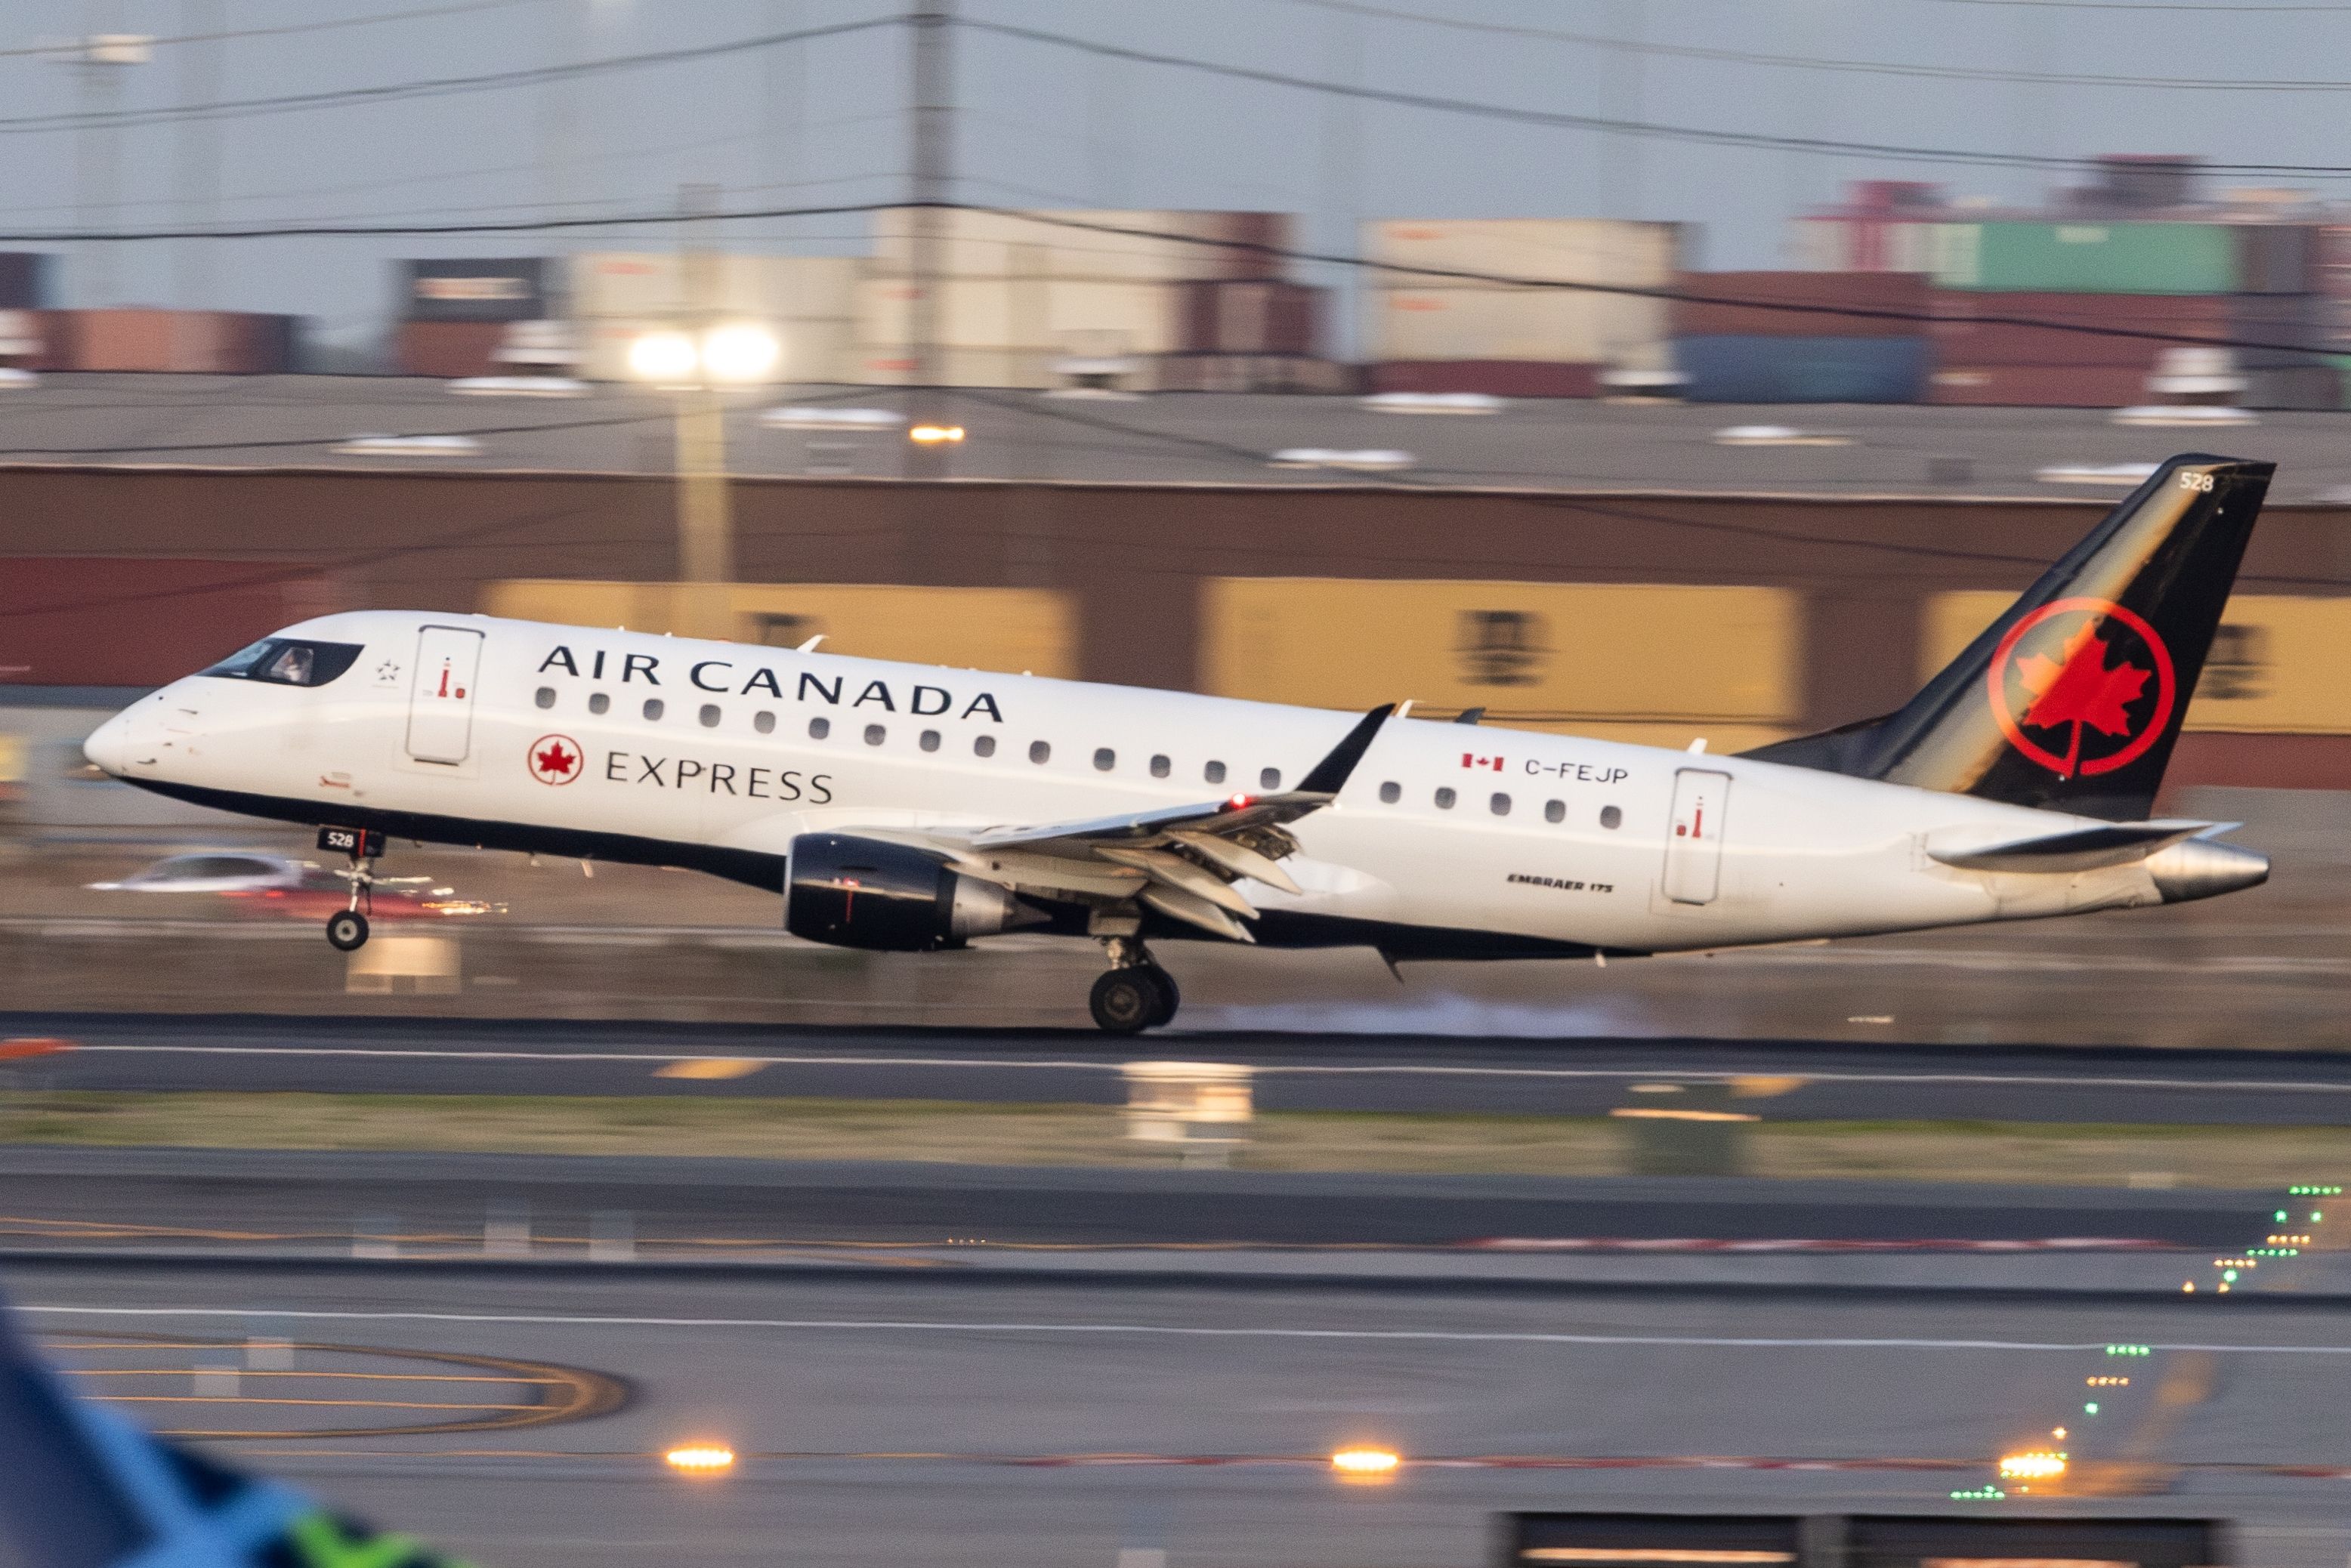 An Air Canada Express Embraer E175 about to land.